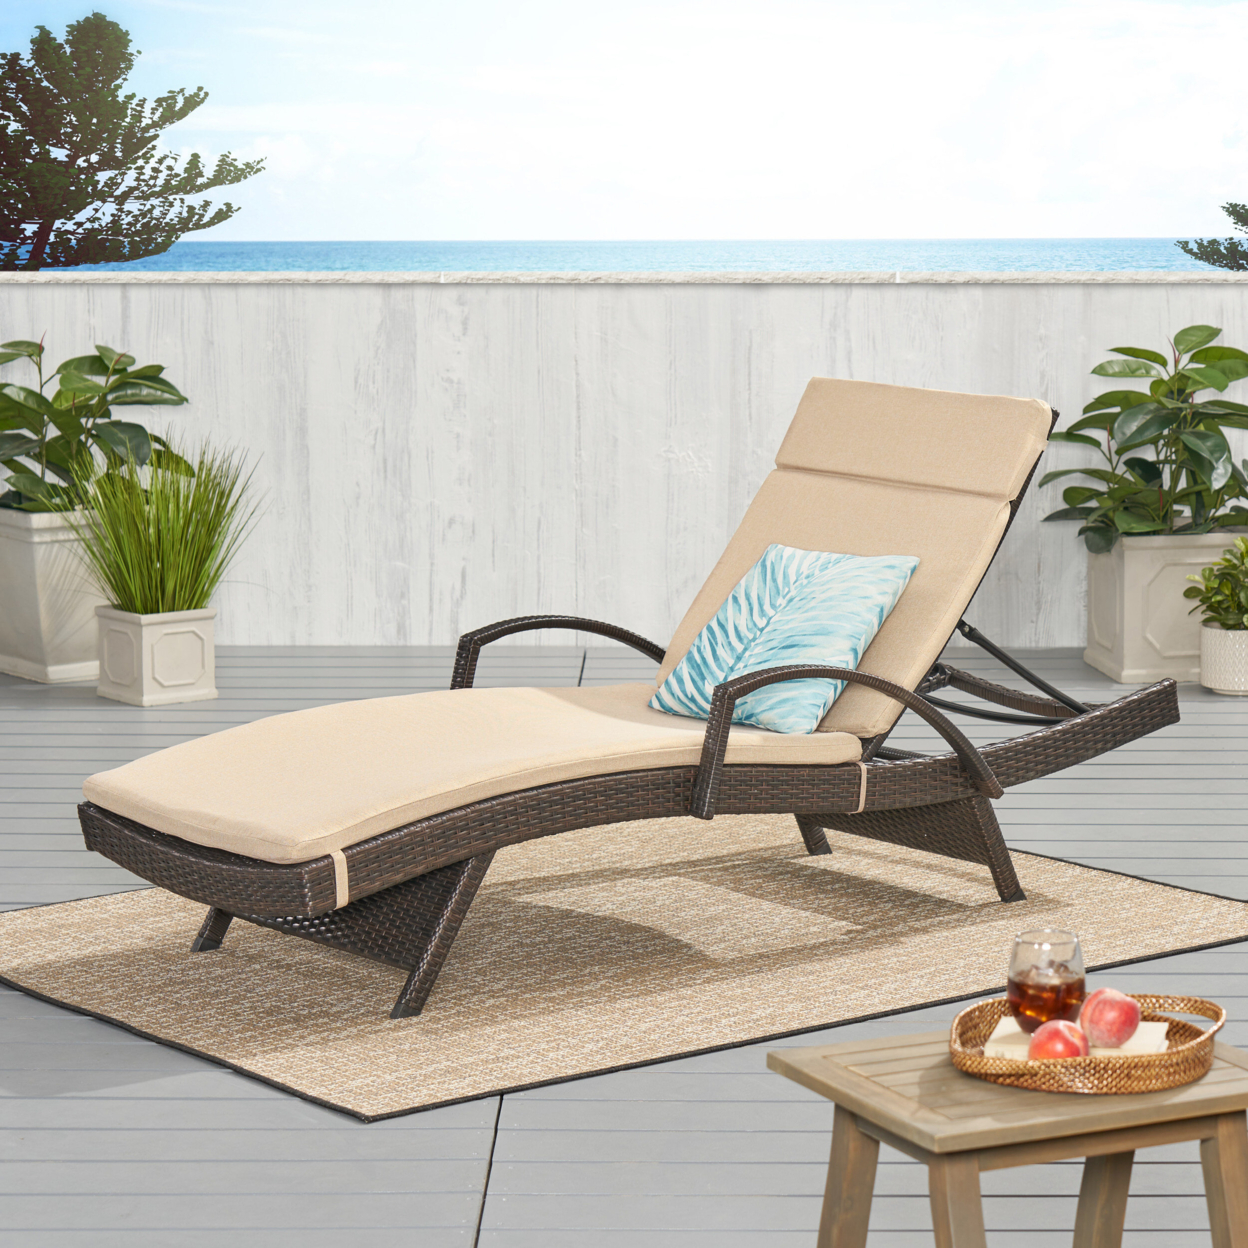 Lakeport Outdoor Adjustable Armed Chaise Lounge Chair With Cushion - Textured Beige Cushion